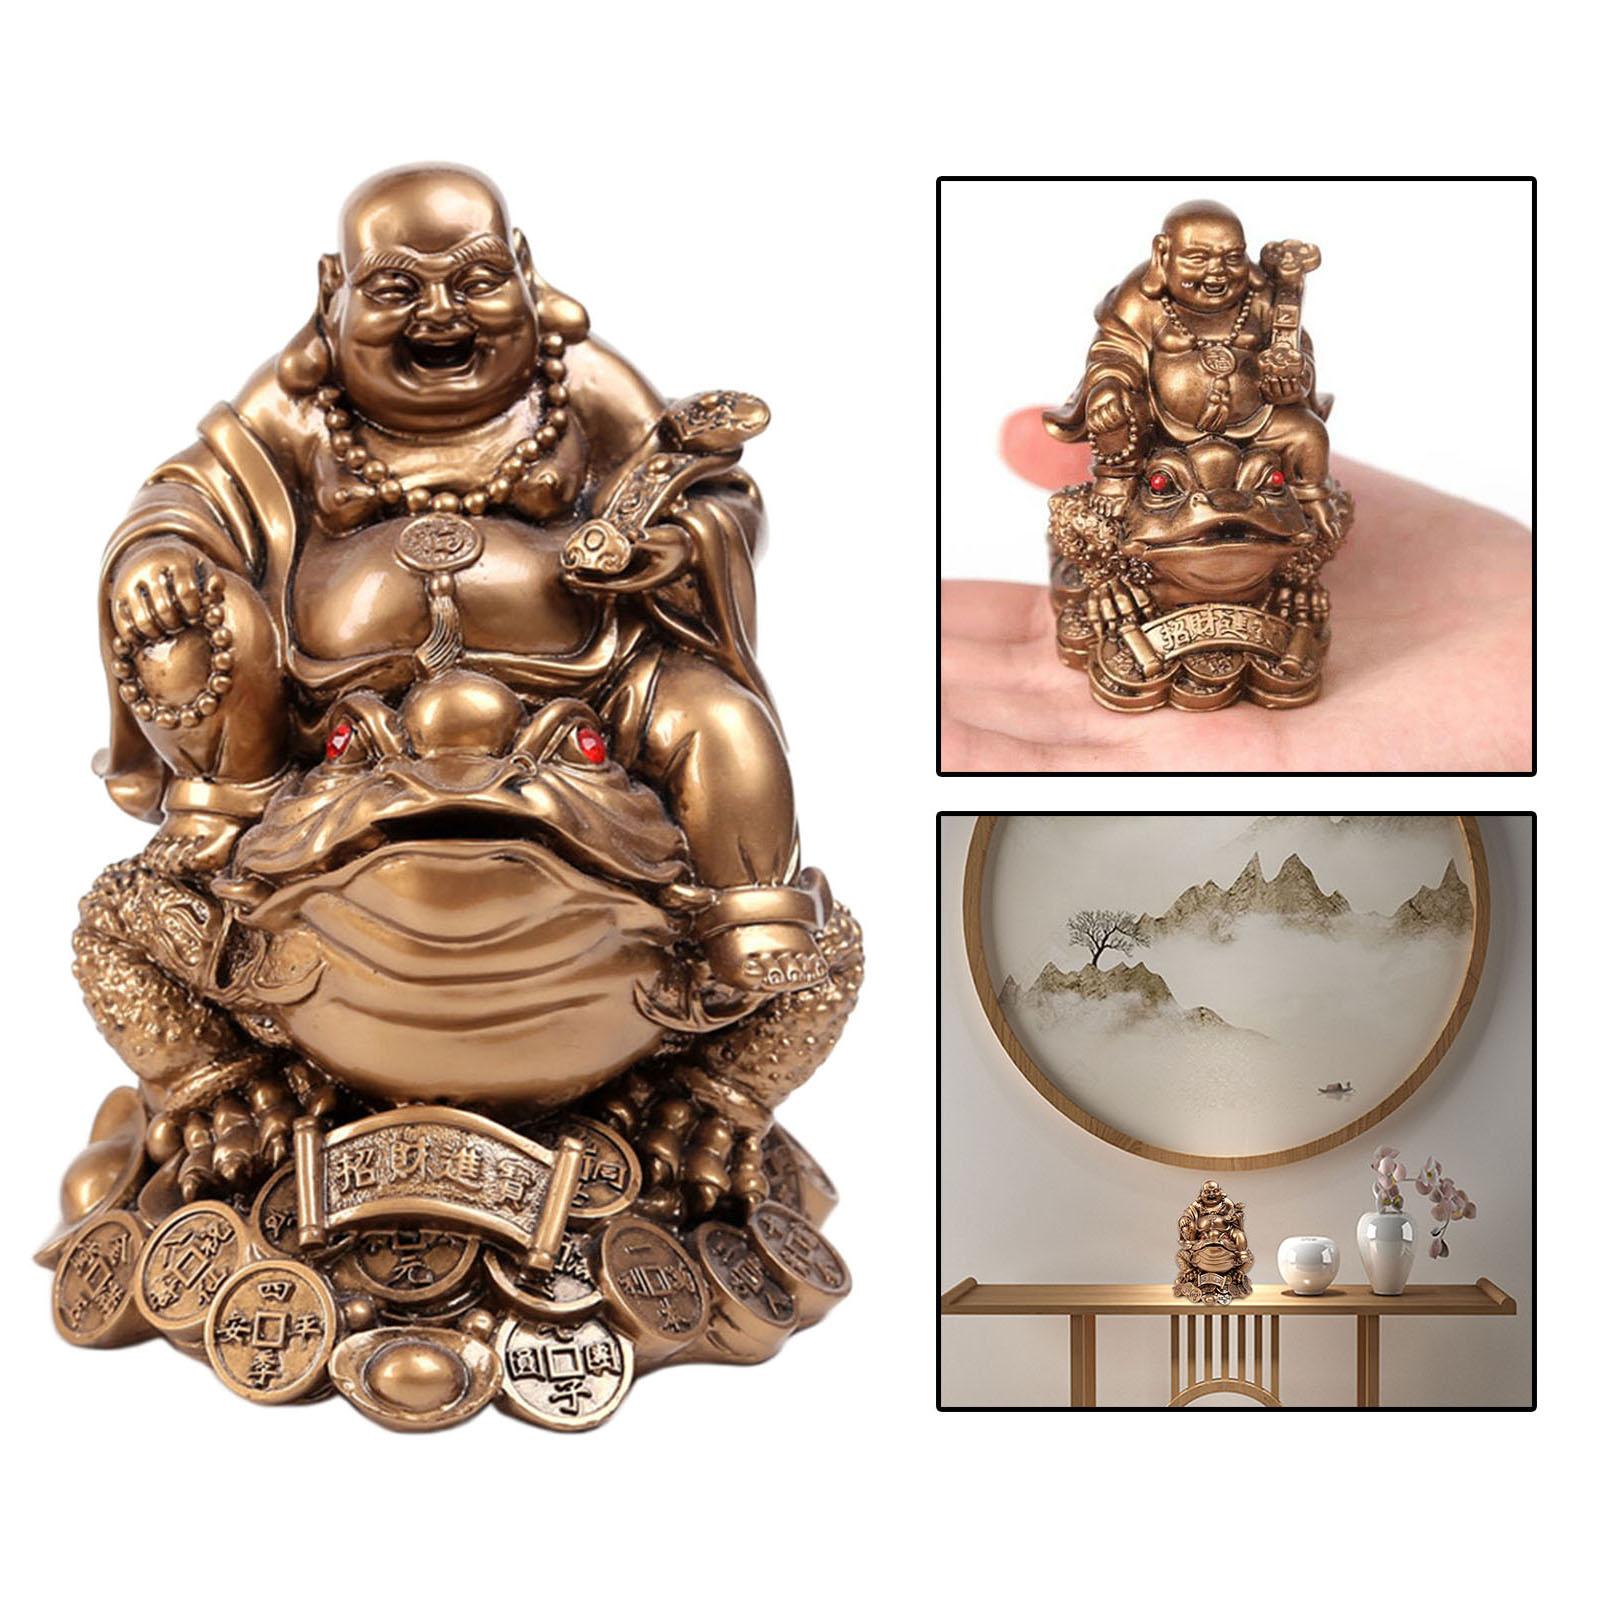 Laughing Buddha Sit On Money Frog Statue for Tabletop Decoration Bronzes